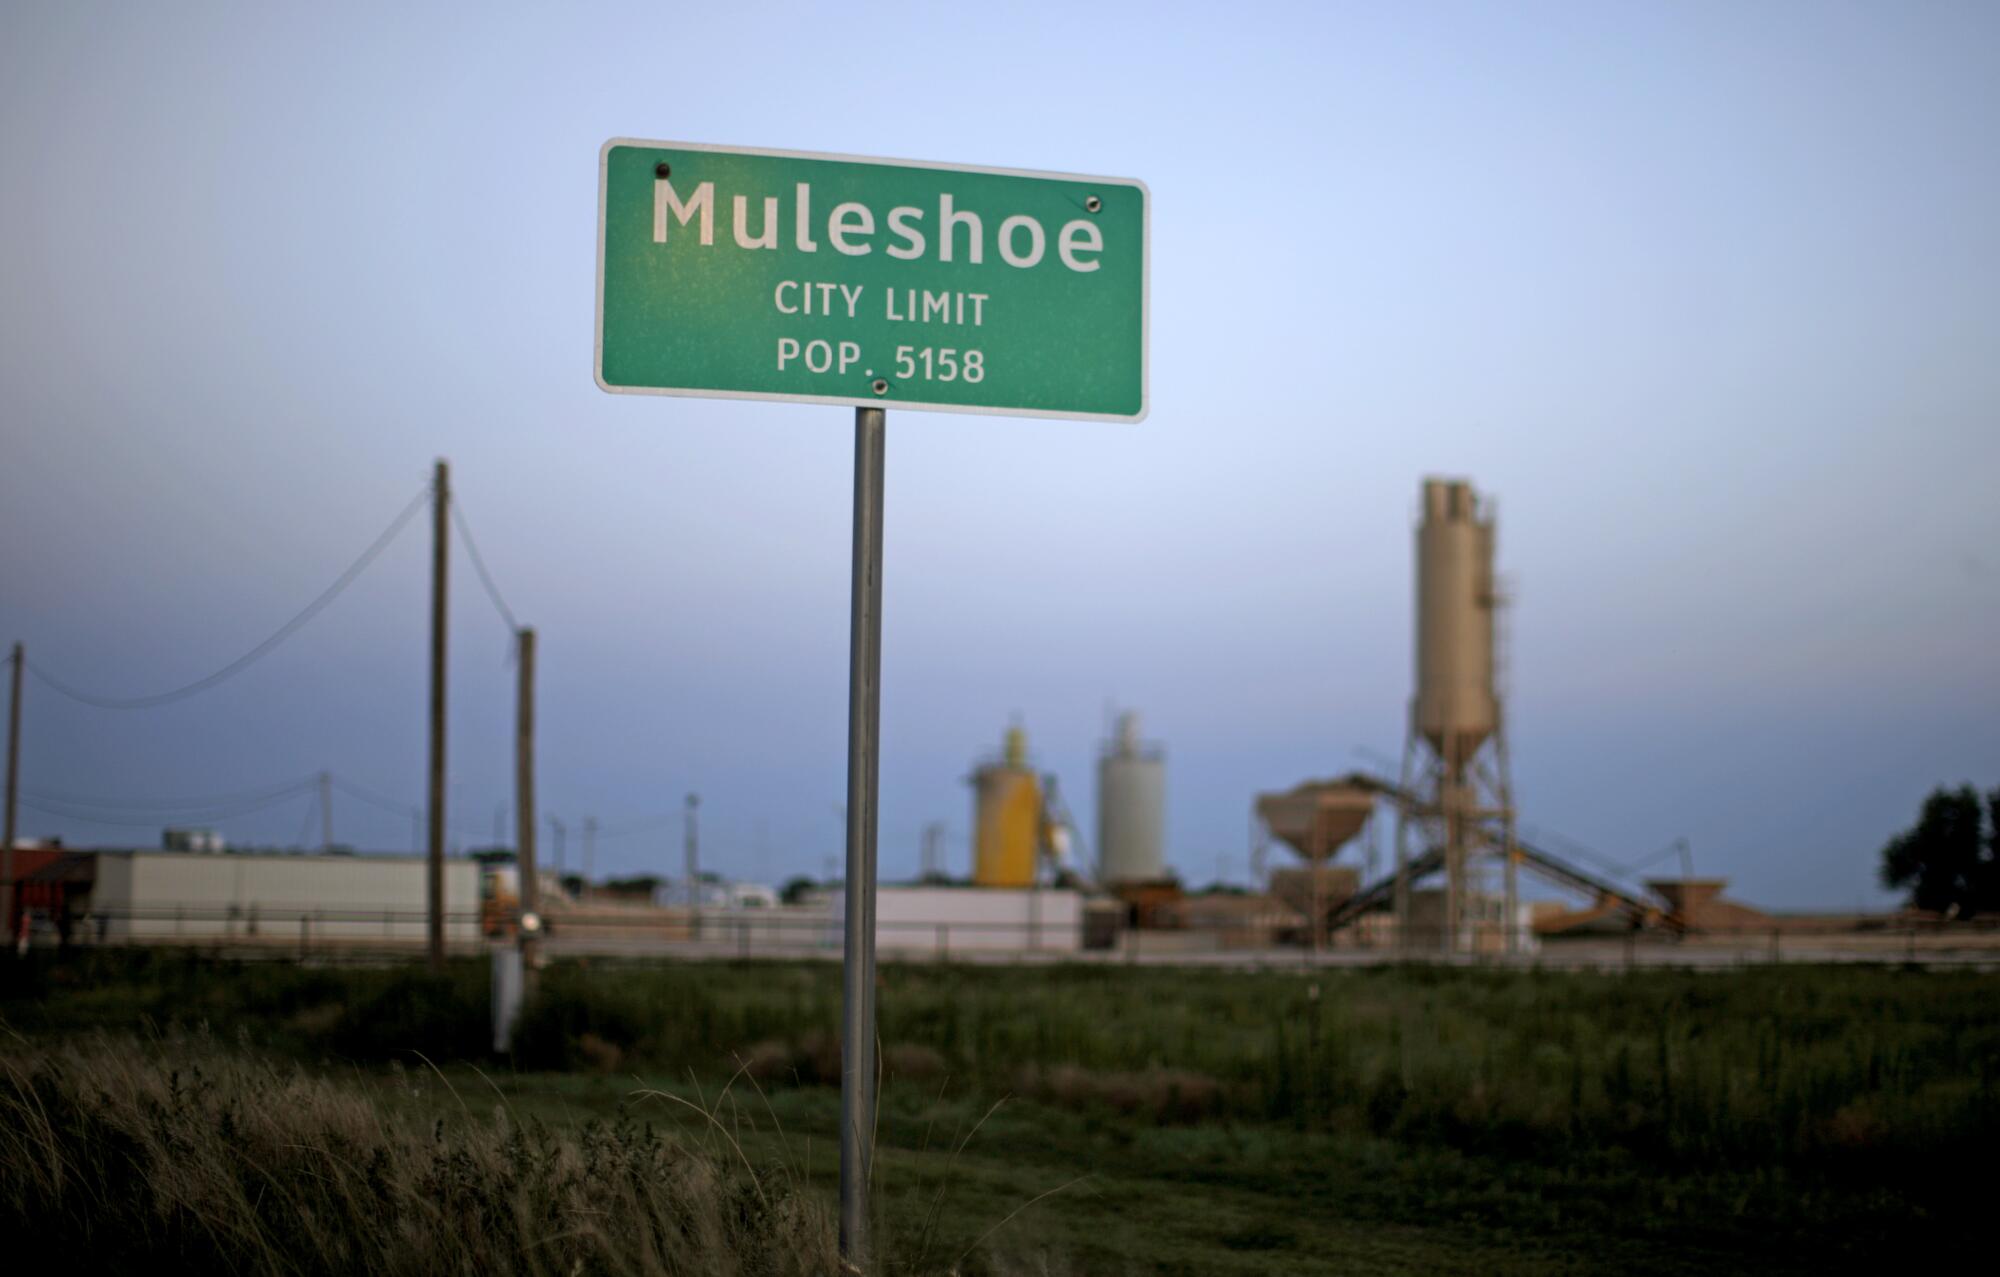 The Muleshoe, Texas, city limit sign is seen in the hometown of new USC coach Lincoln Riley in 2015